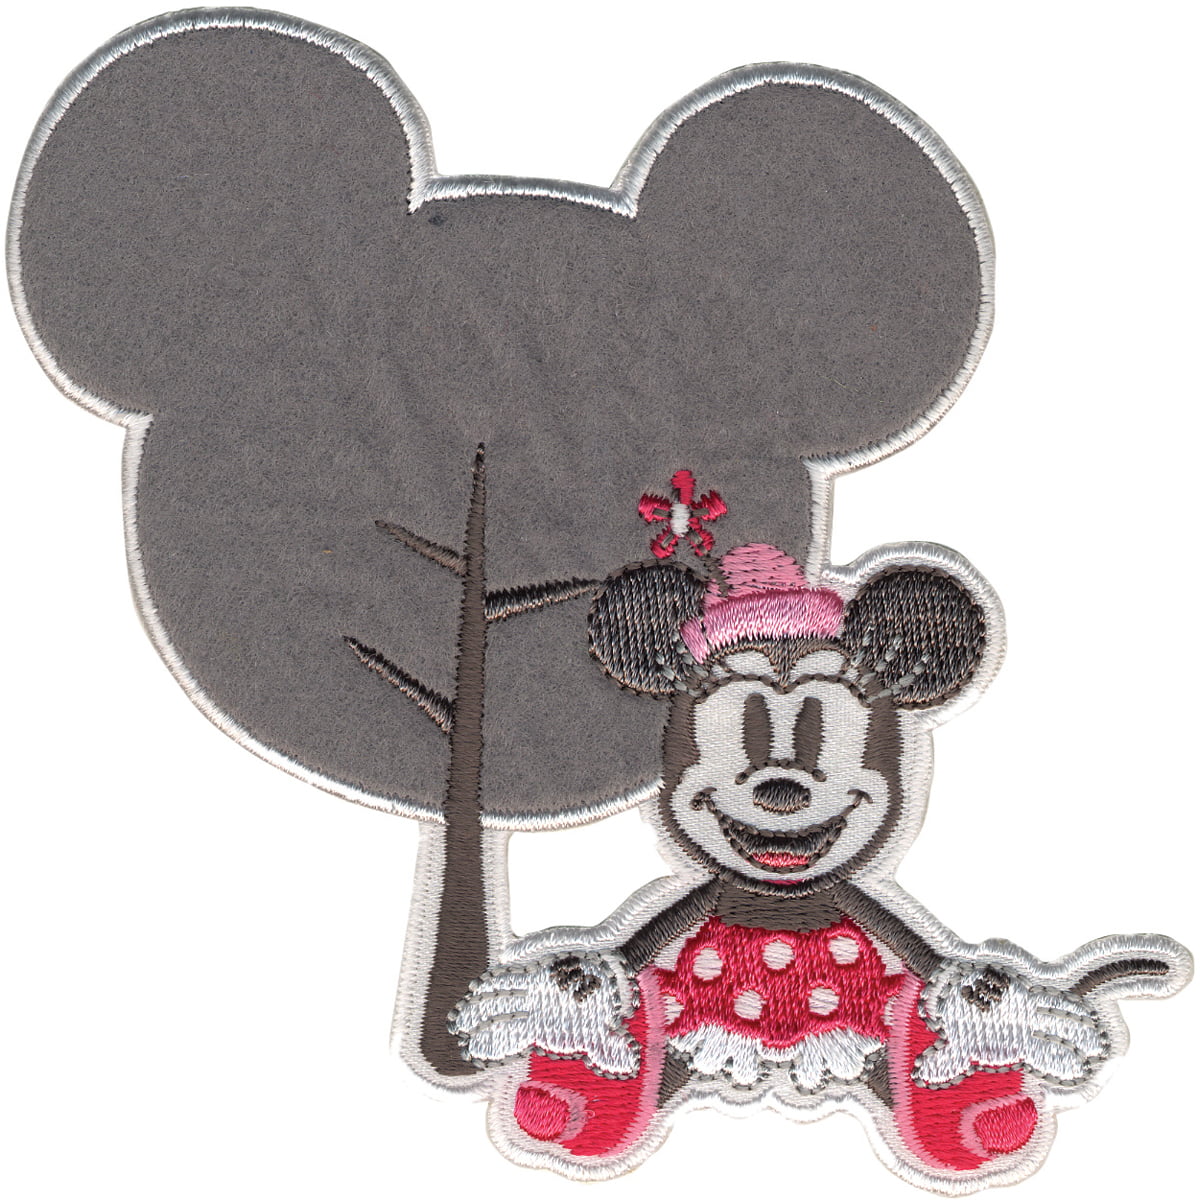 Minnie Mouse Head Iron On Transfer 5"x5" for LIGHT Colored Fabric 